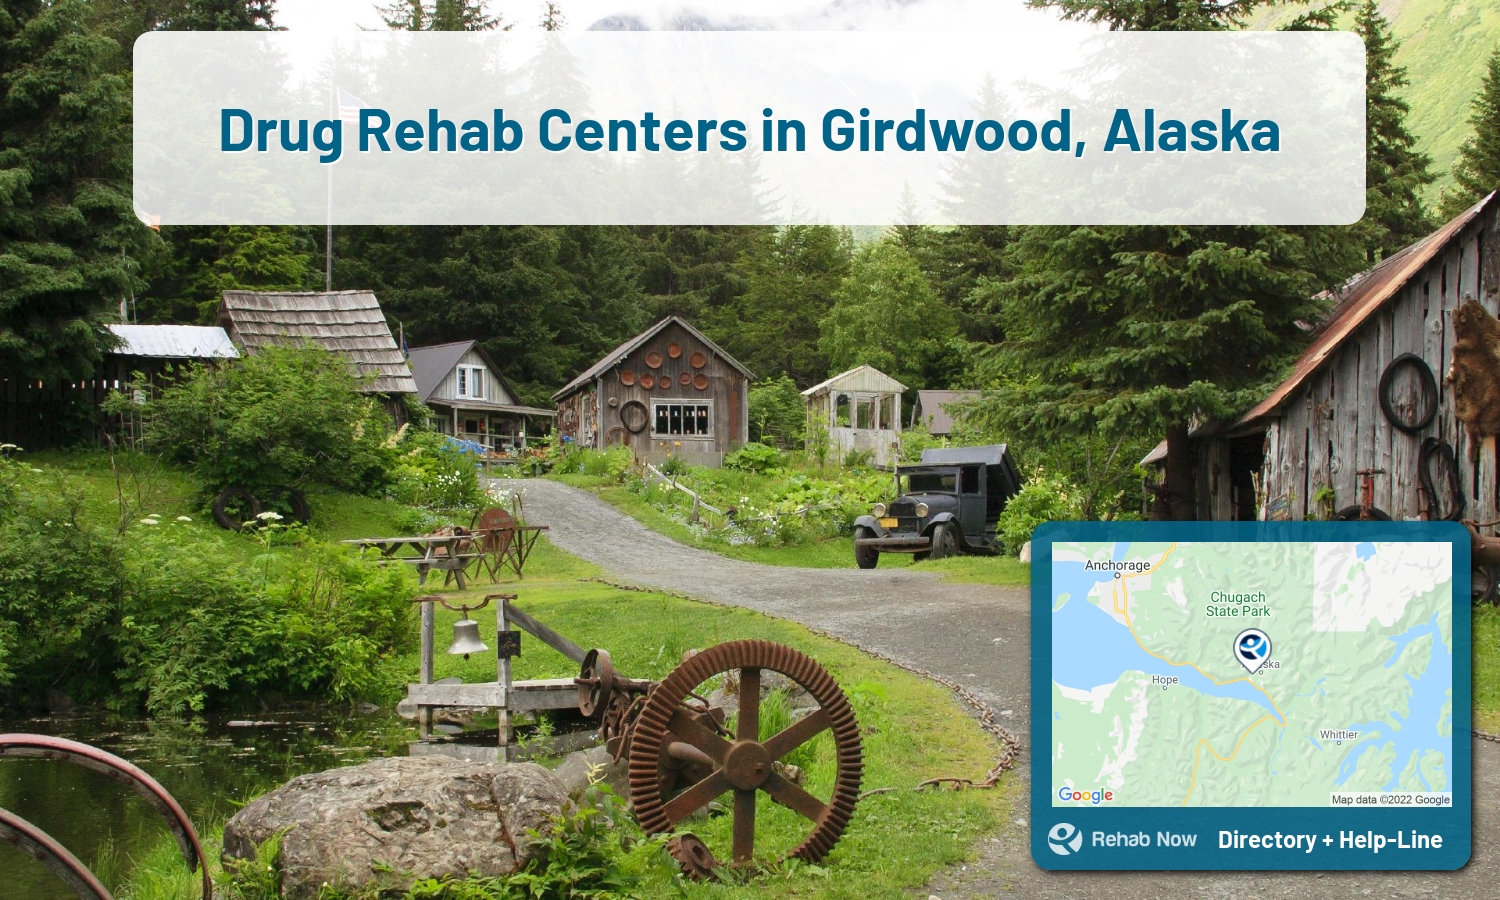 List of alcohol and drug treatment centers near you in Girdwood, Alaska. Research certifications, programs, methods, pricing, and more.